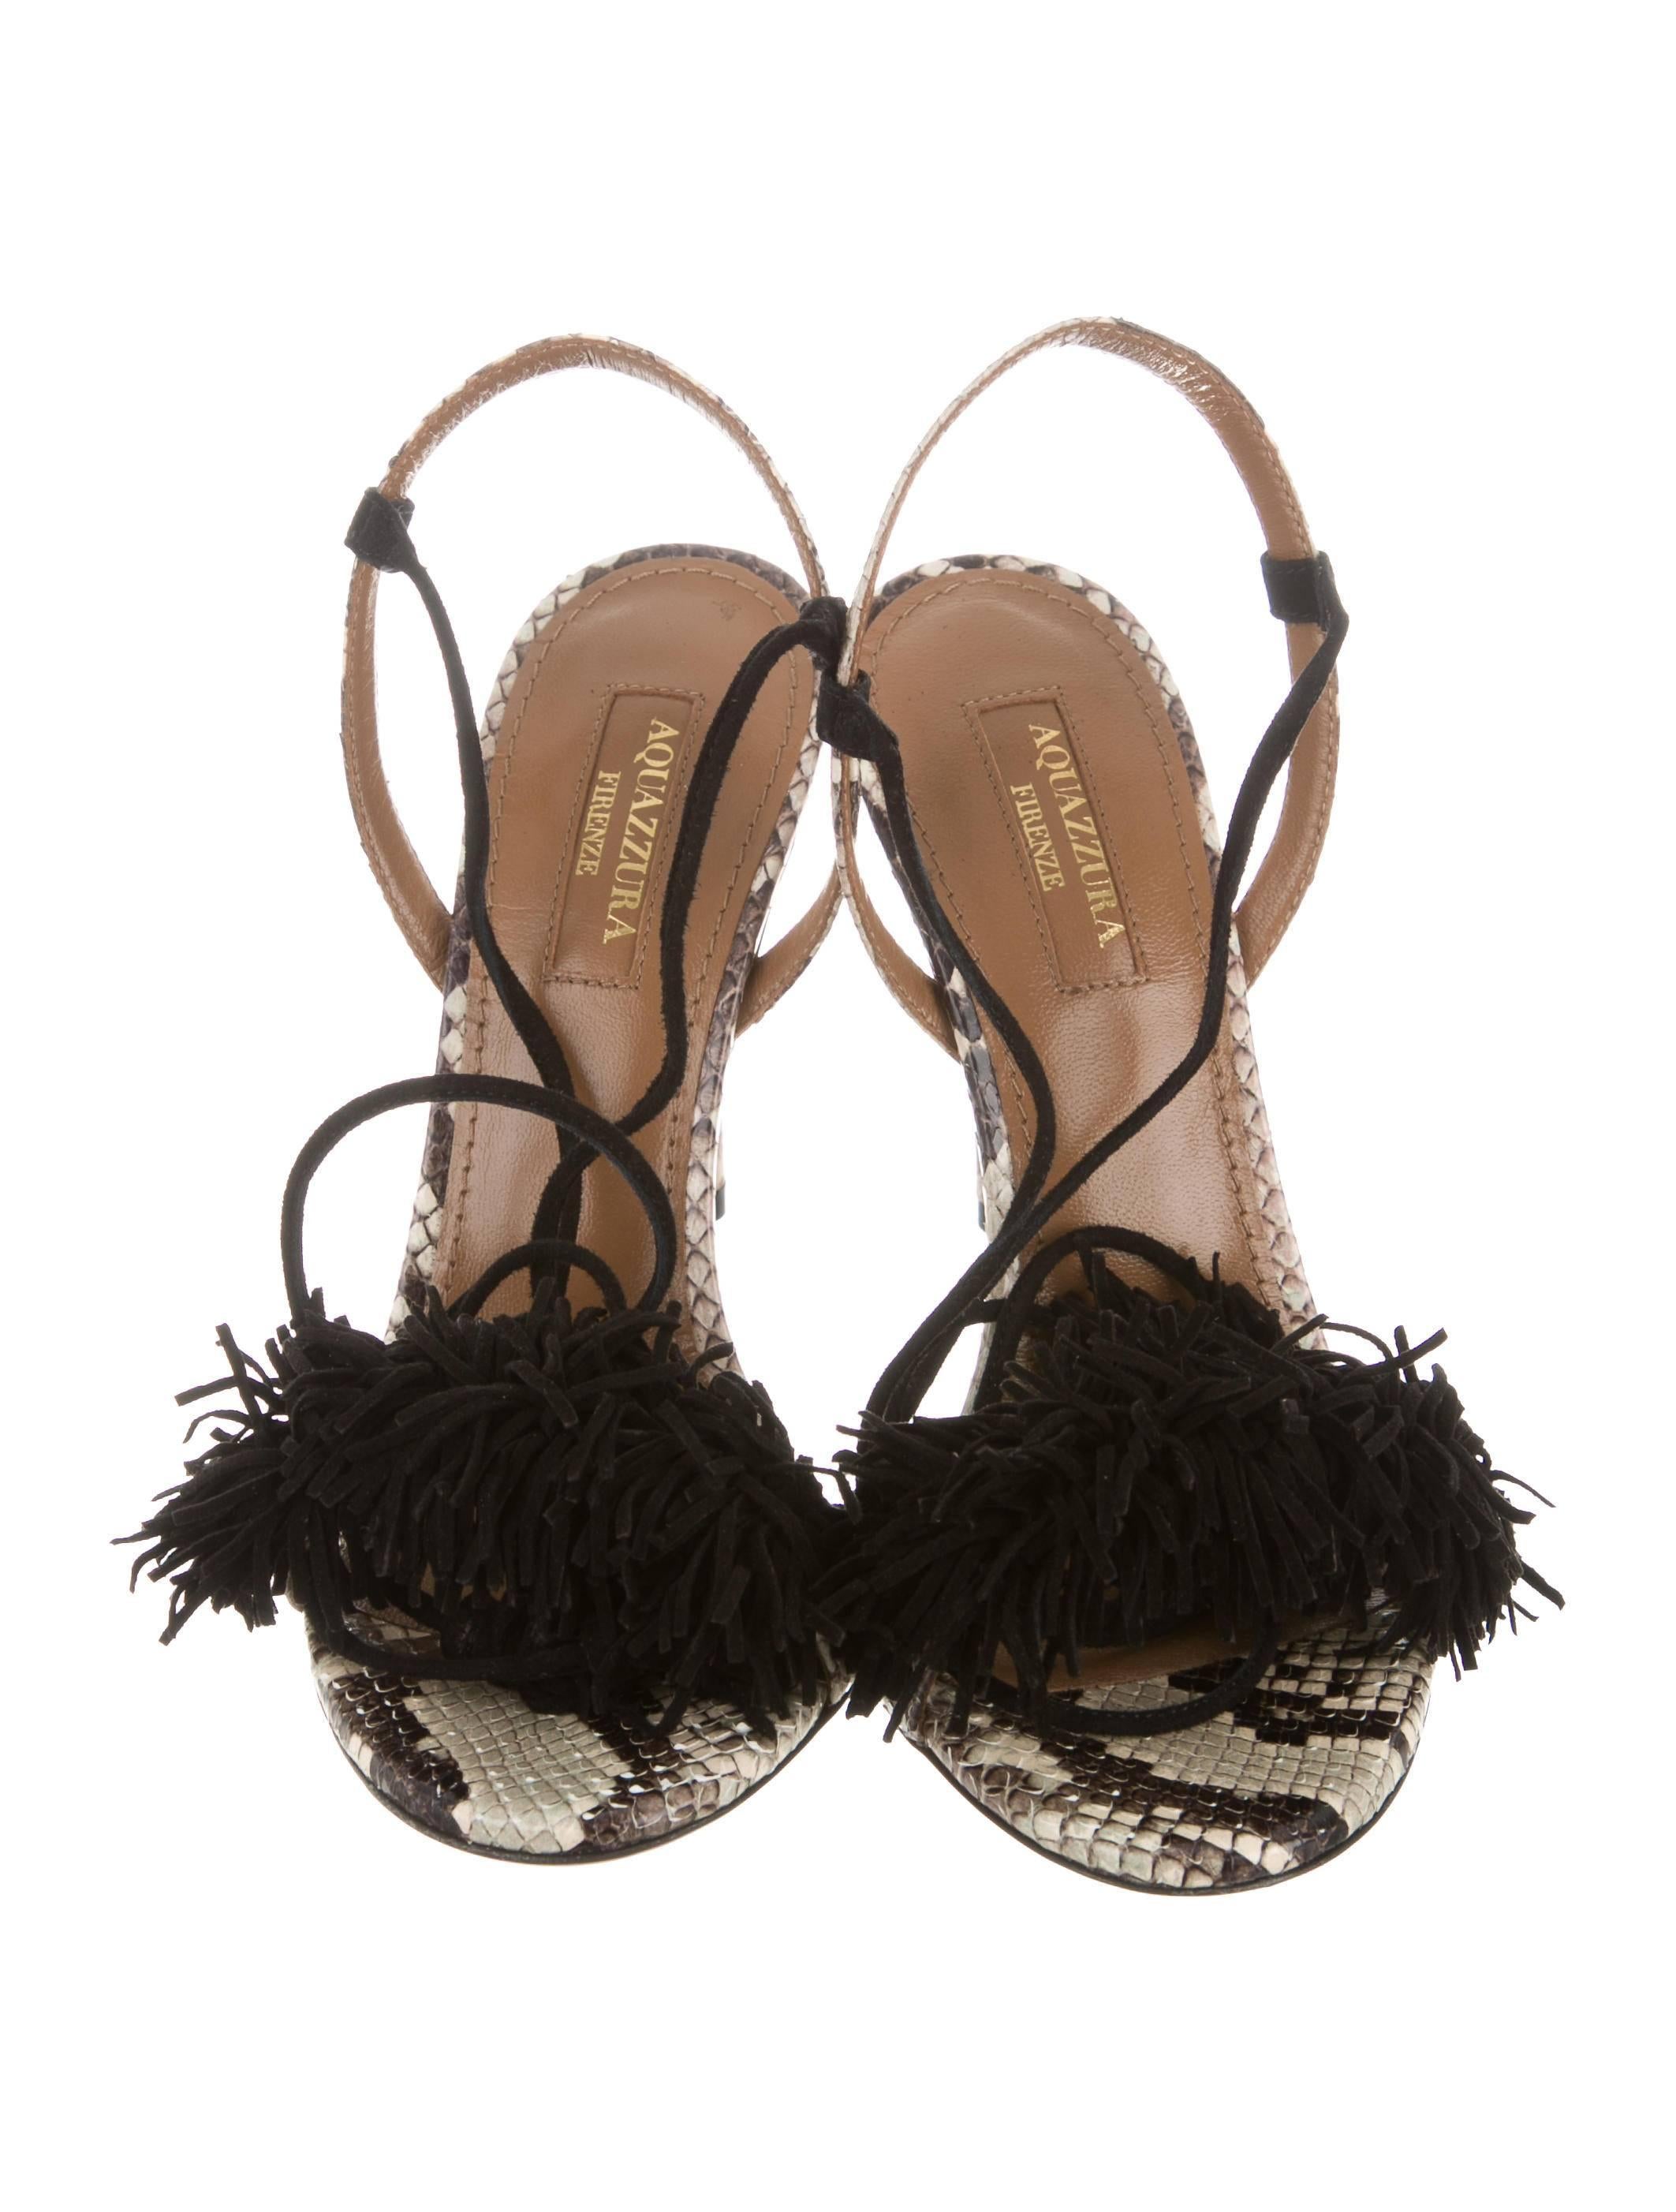 Women's Aquazzura NEW & SOLD OUT Black Leather Suede Pom Pom Sandals Heels